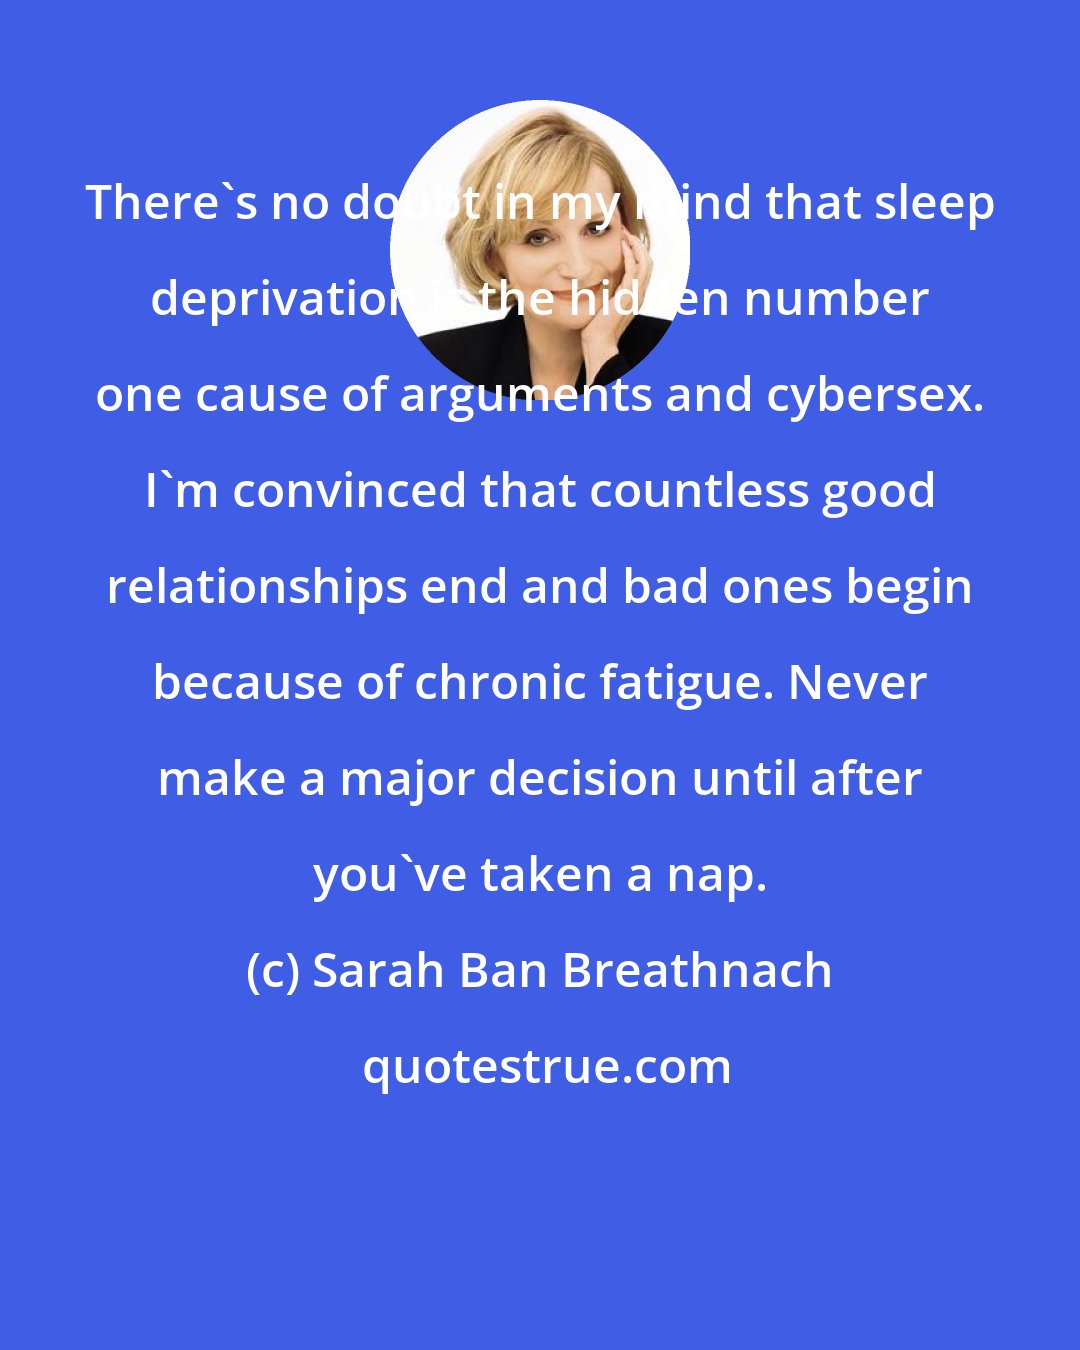 Sarah Ban Breathnach: There's no doubt in my mind that sleep deprivation is the hidden number one cause of arguments and cybersex. I'm convinced that countless good relationships end and bad ones begin because of chronic fatigue. Never make a major decision until after you've taken a nap.